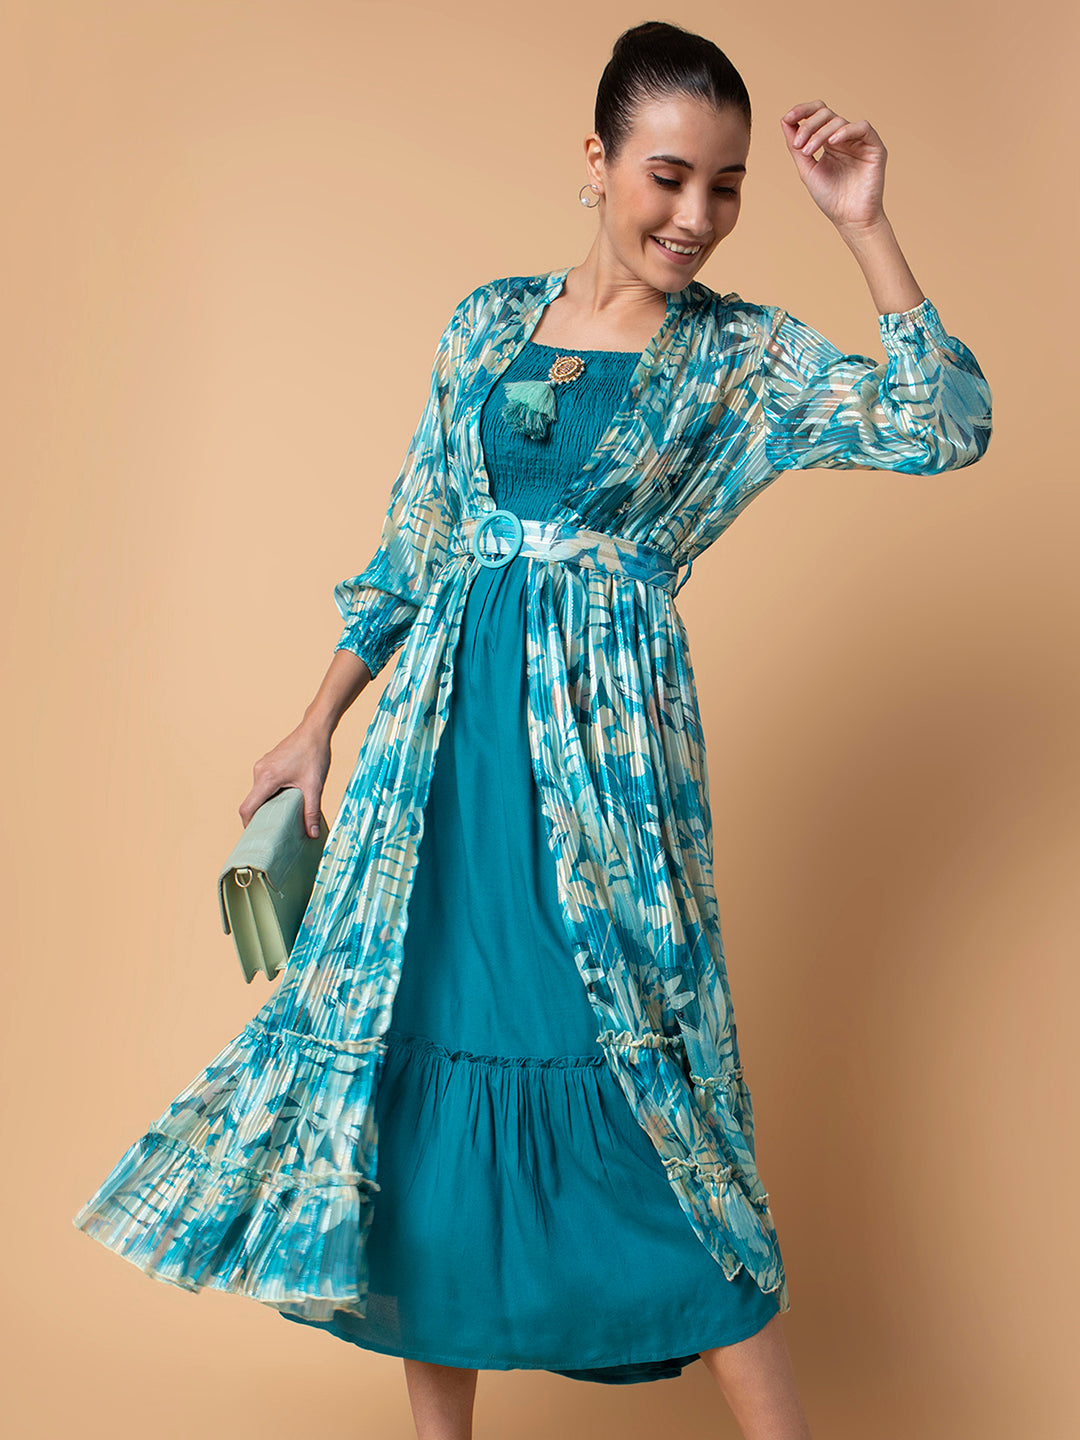 Women Solid Turquoise Blue Midi Fit and Flare Dress with Shrug and Belt